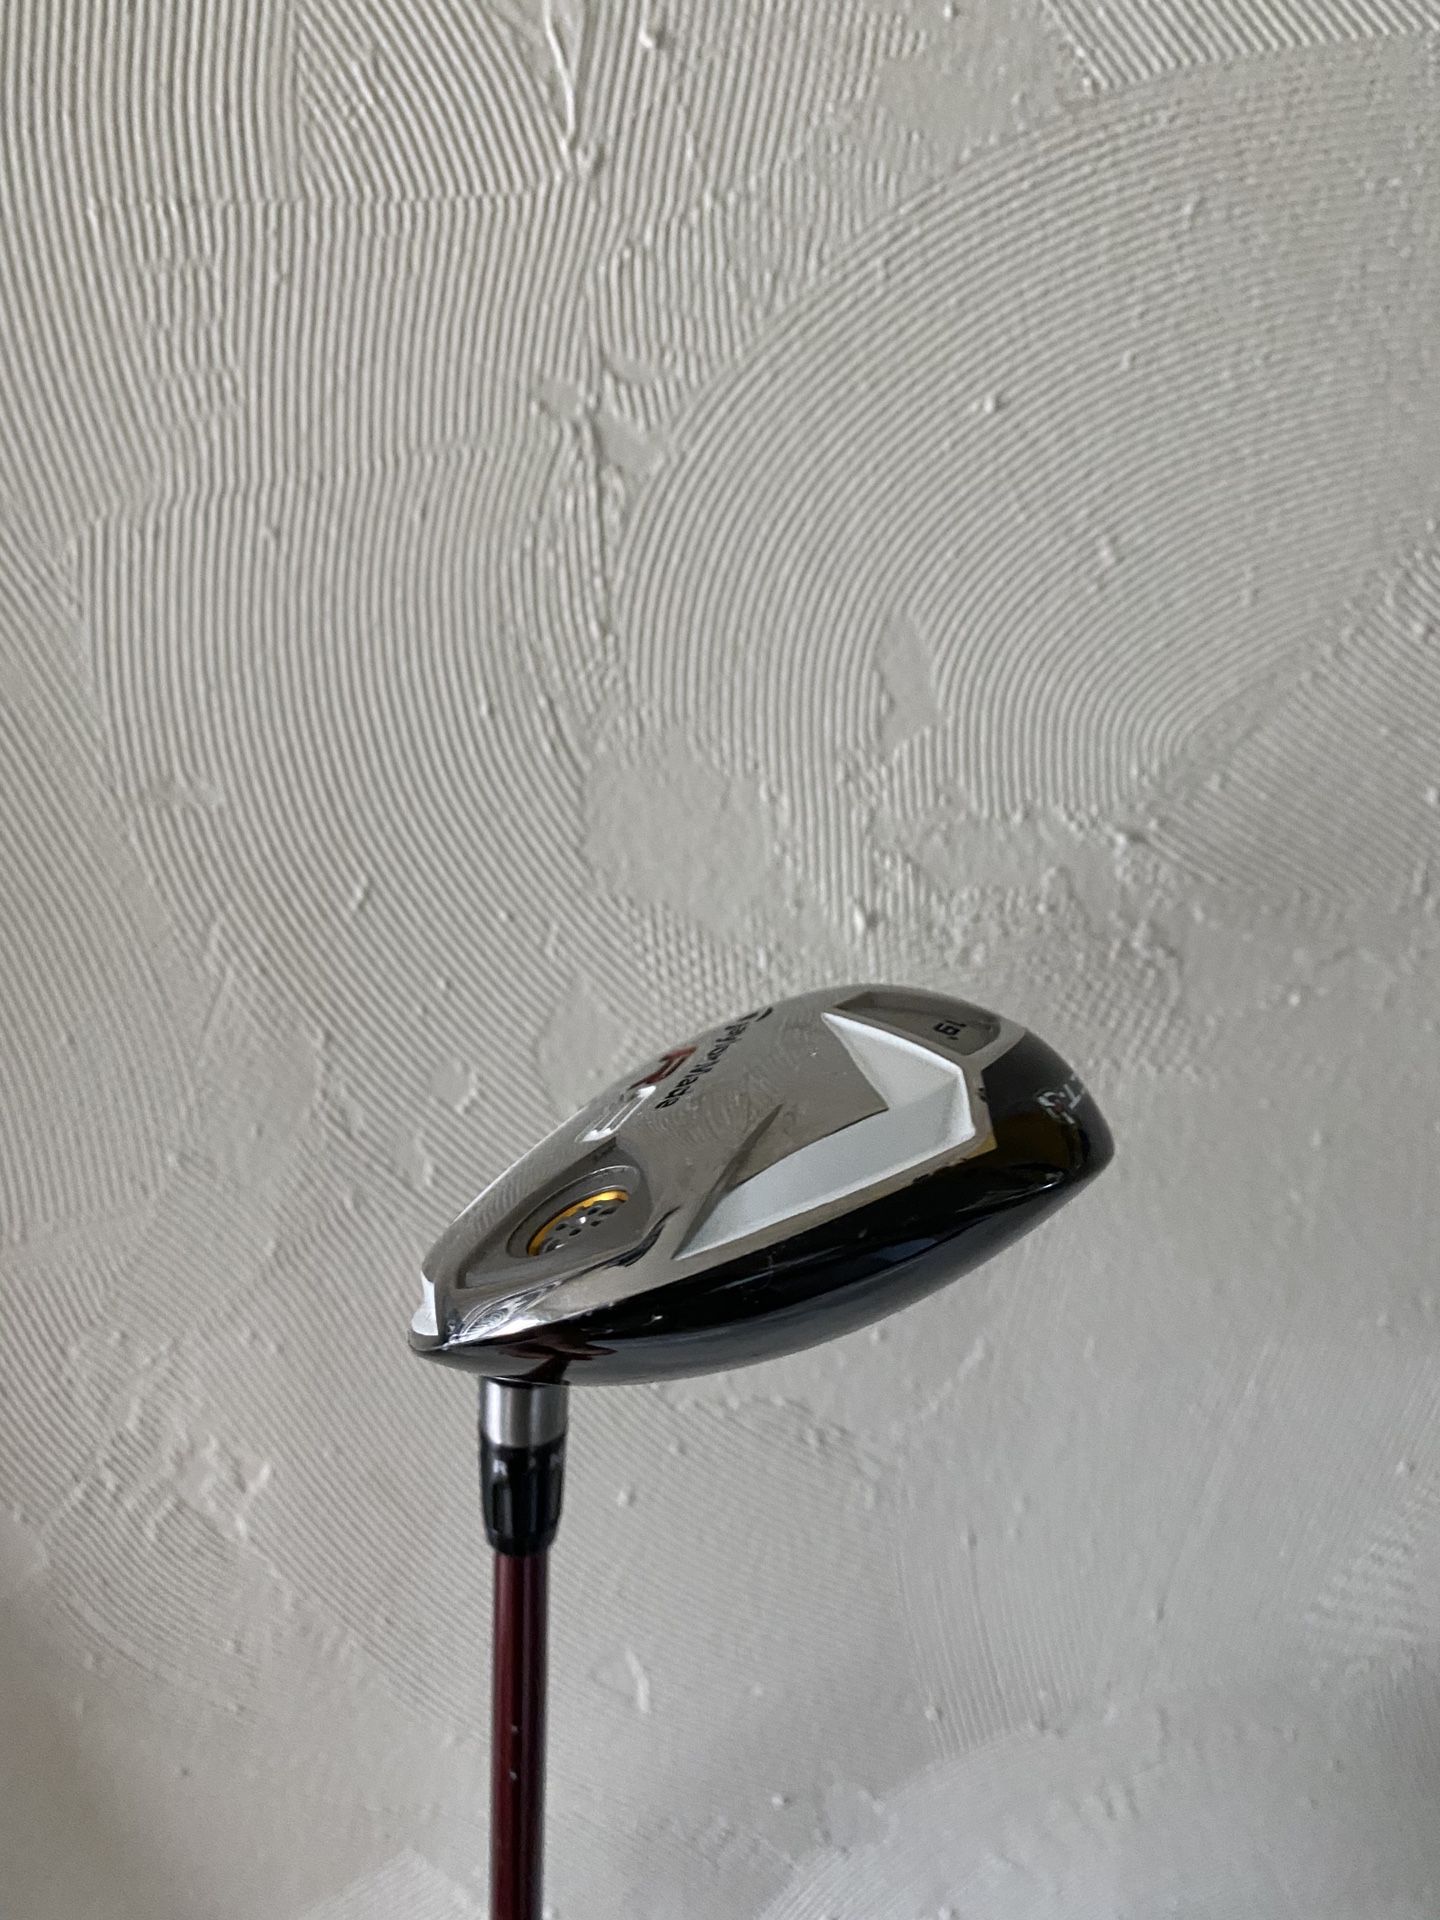 Taylormade Left Handed R9 5 wood